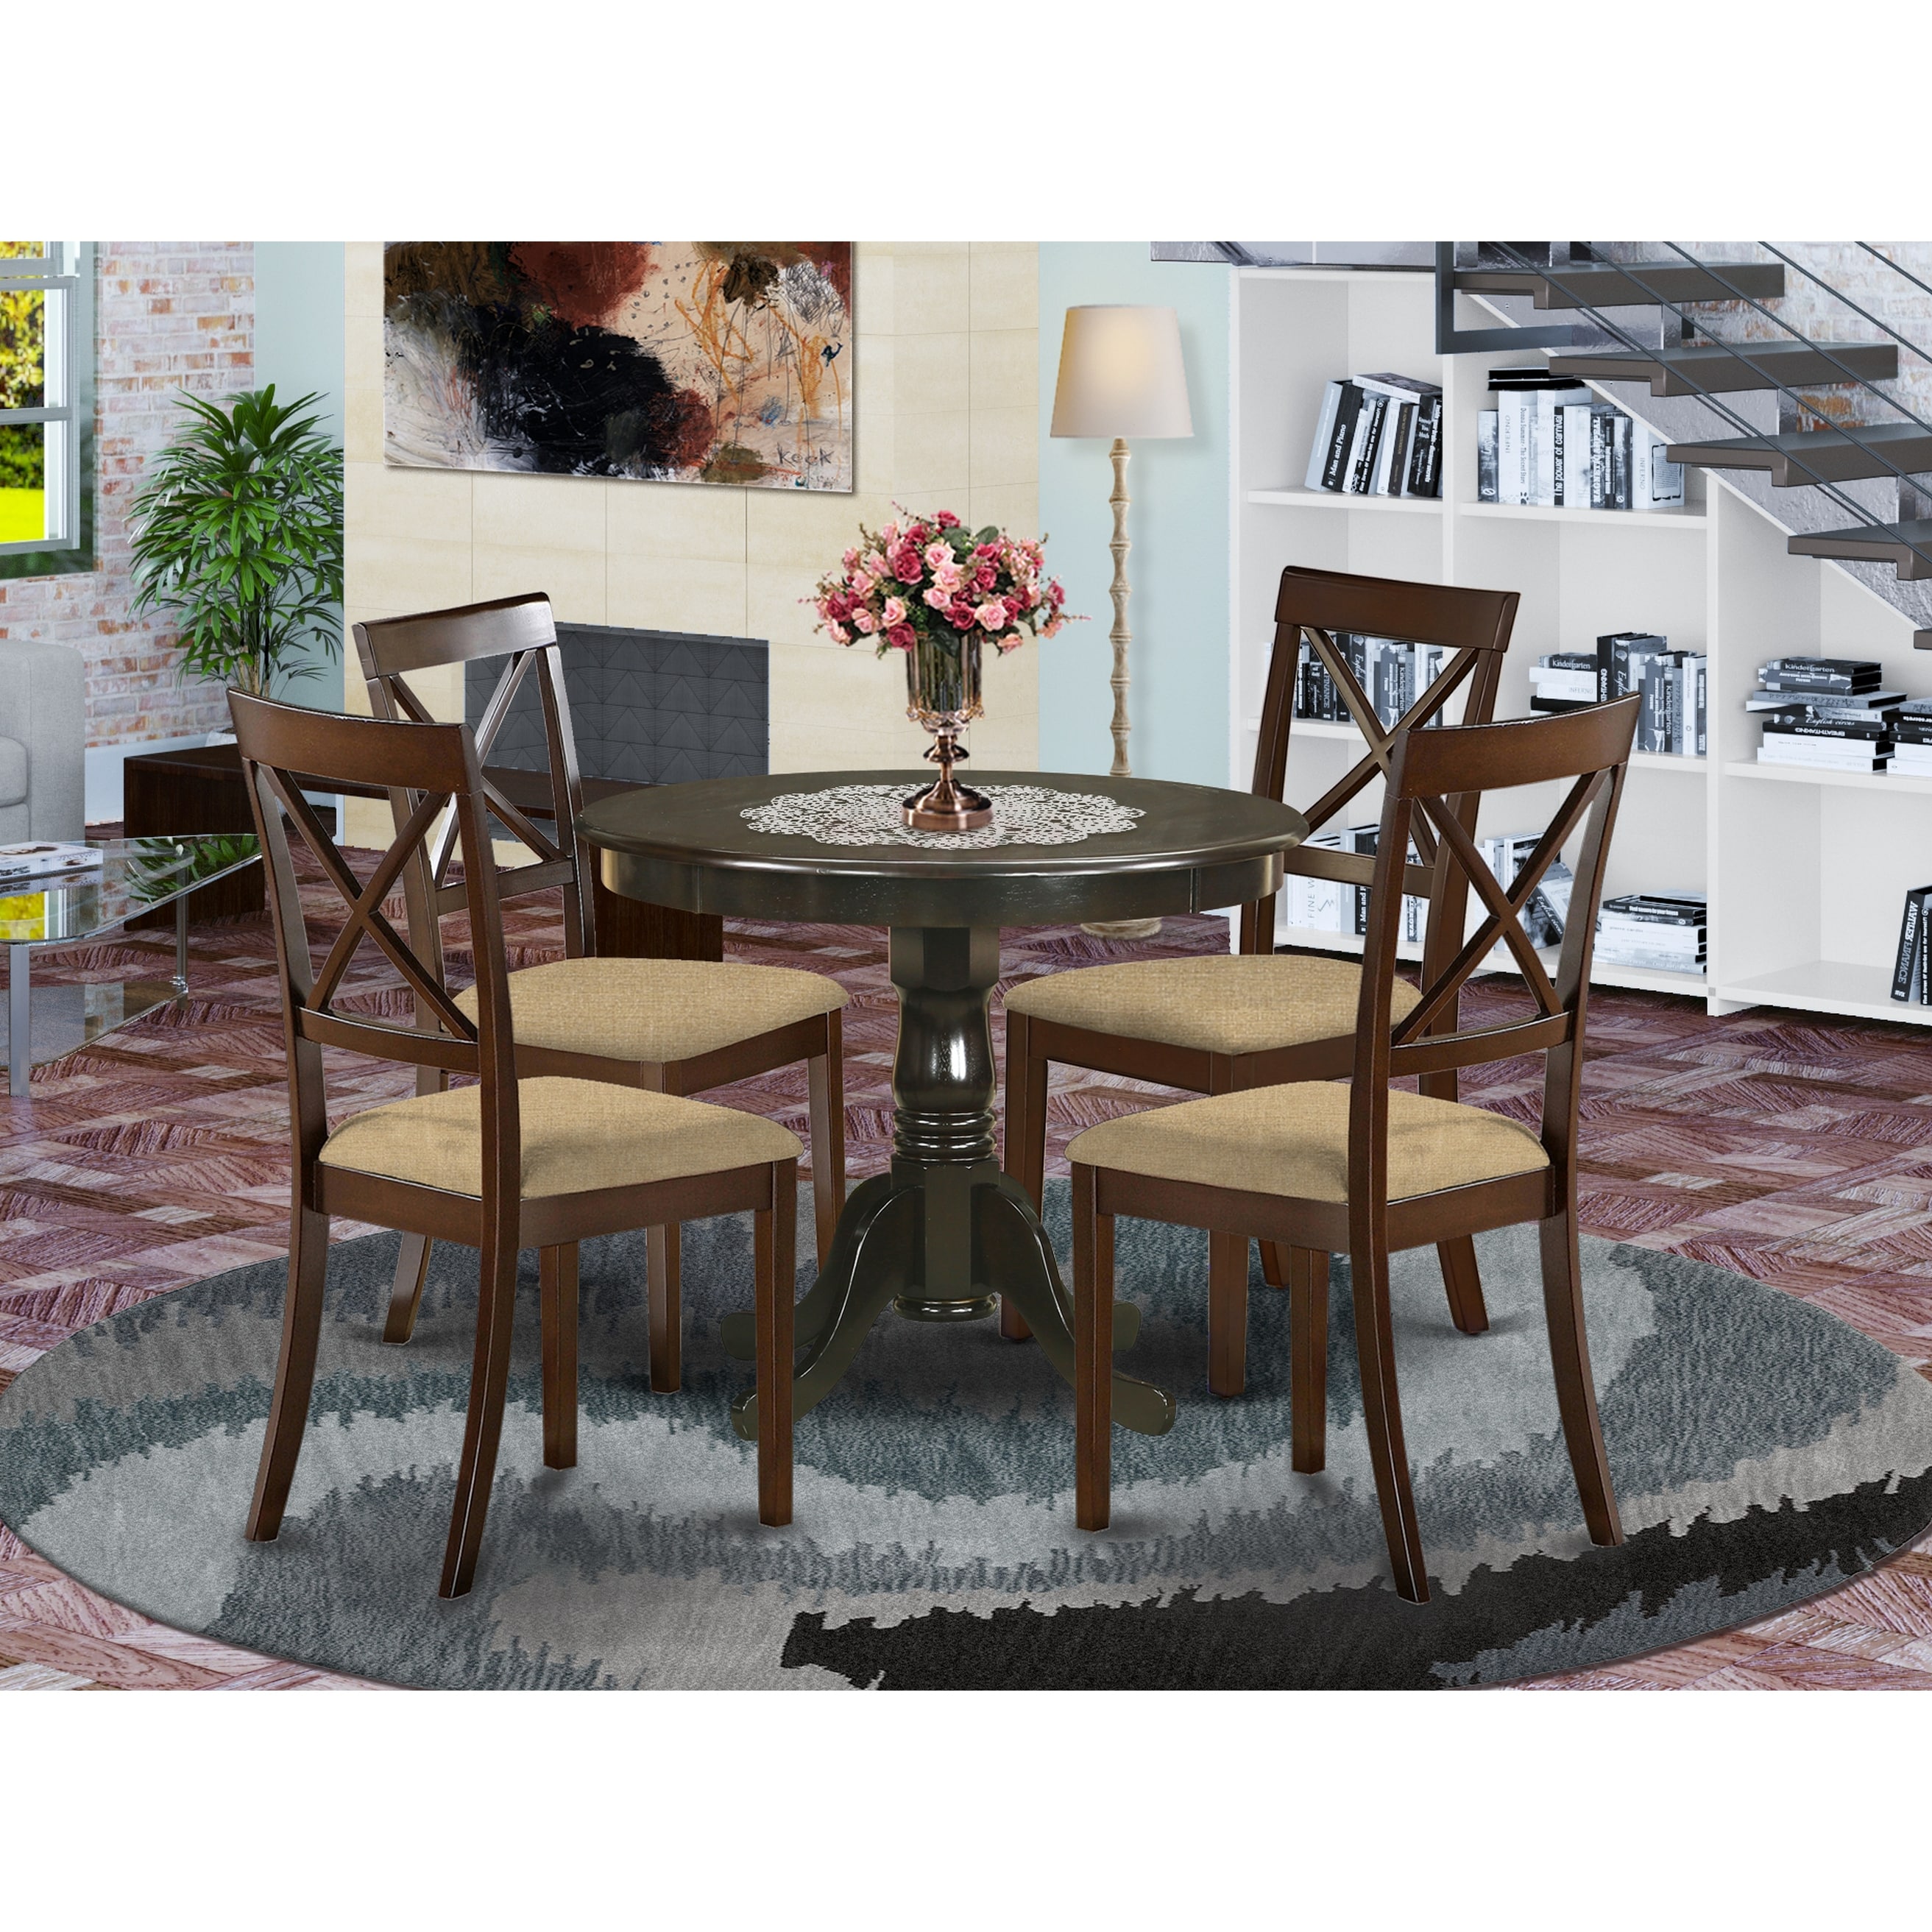 Shop For 5 Piece Small Kitchen Table And 4 Chairs For Dining Room Get Free Delivery On Everything At Overstock Your Online Furniture Shop Get 5 In Rewards With Club O 10195838